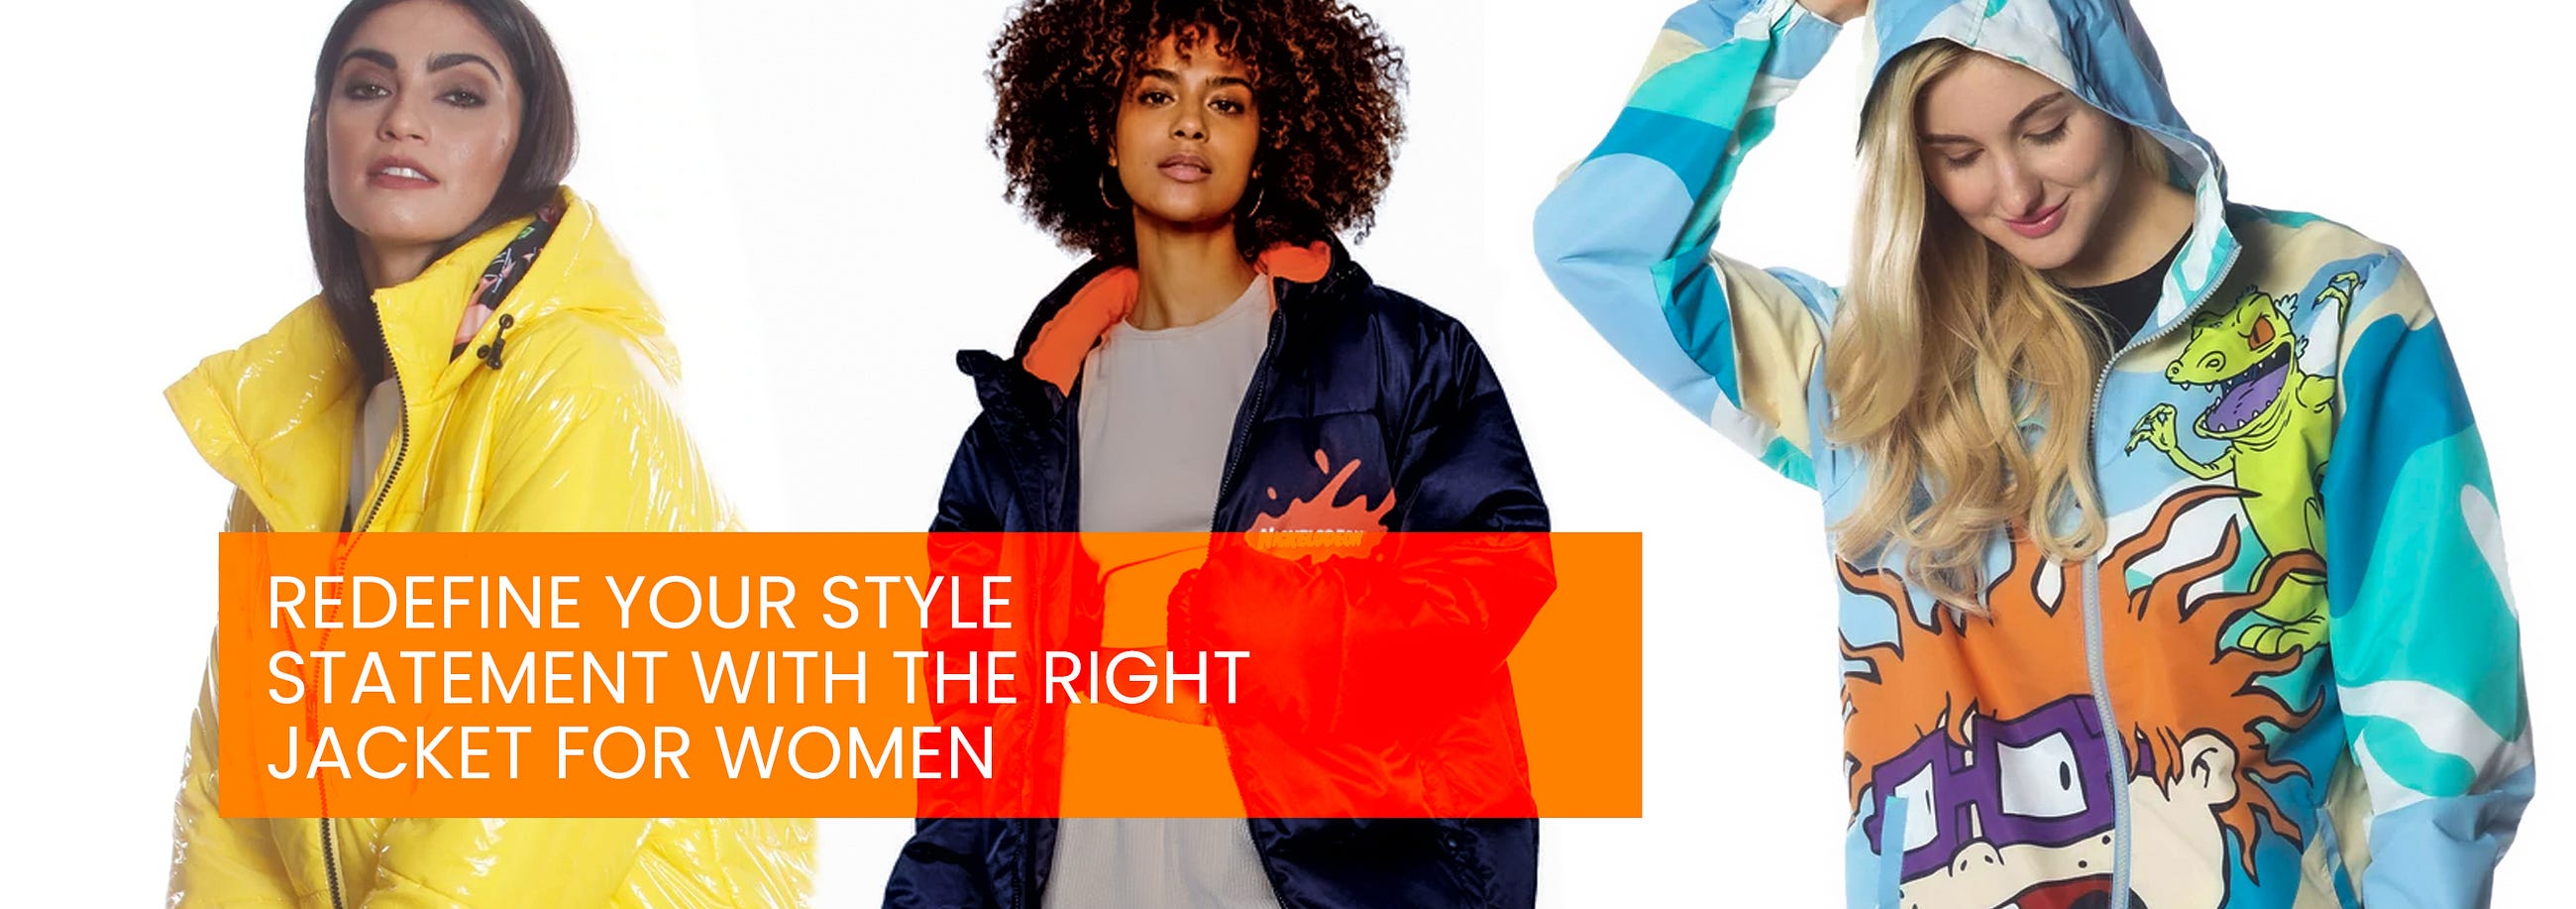 Redefine Your Style Statement With The Right Jacket For Women